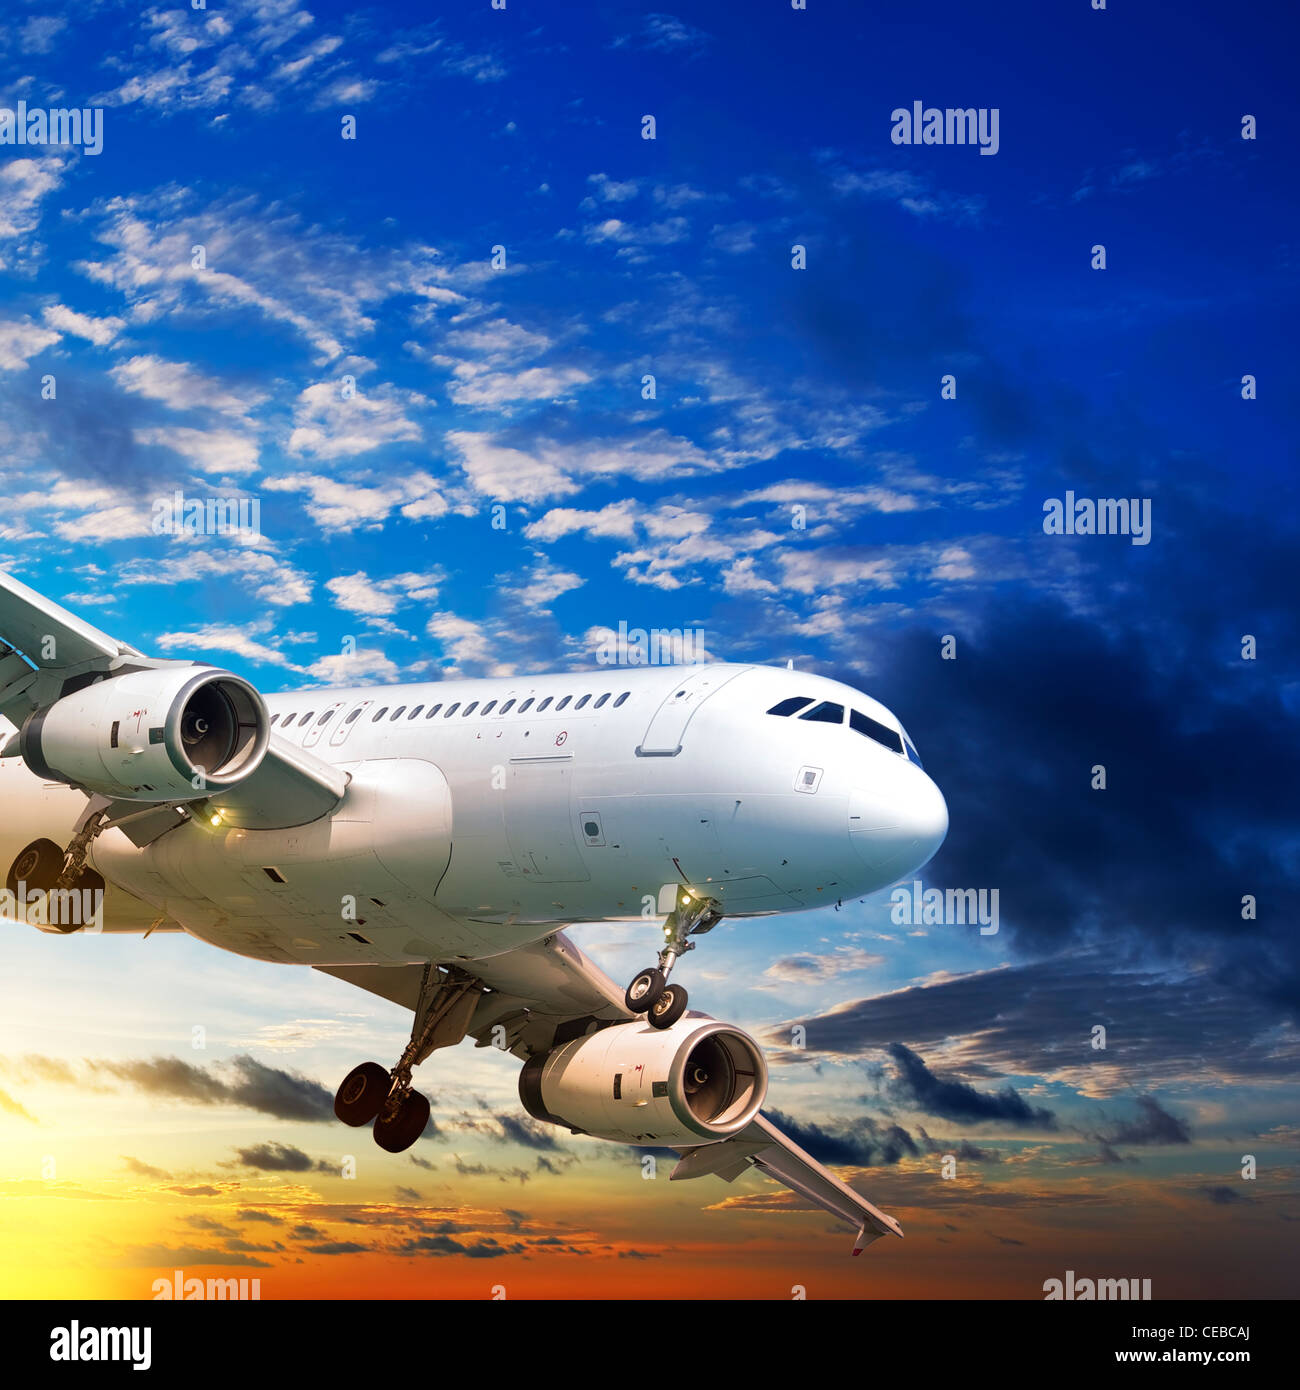 Jet plane in a sunset sky. Square composition. Stock Photo